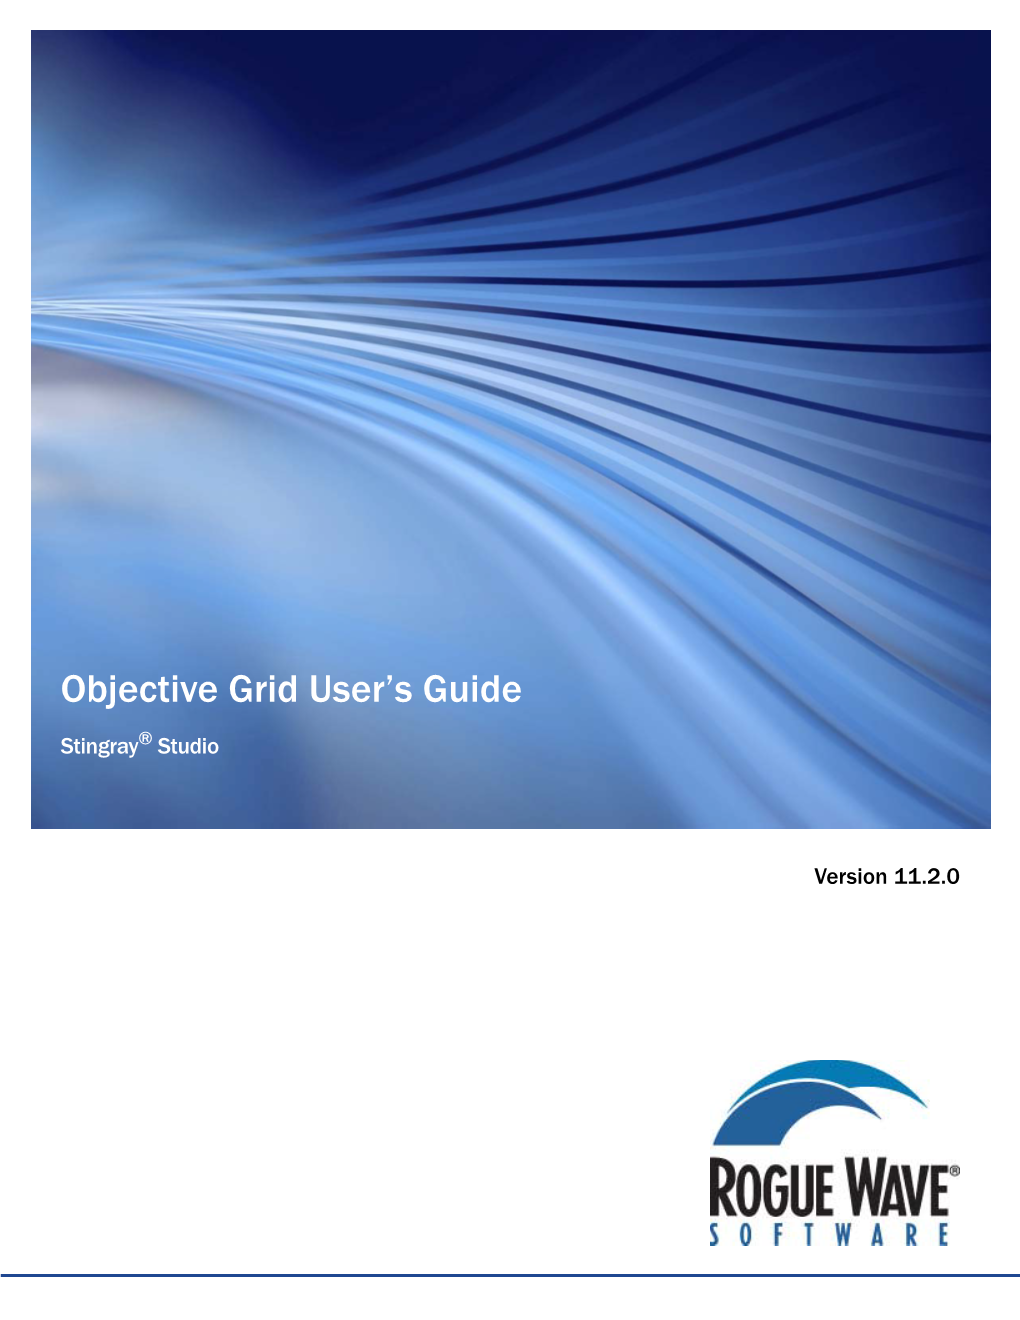 Objective Grid User's Guide